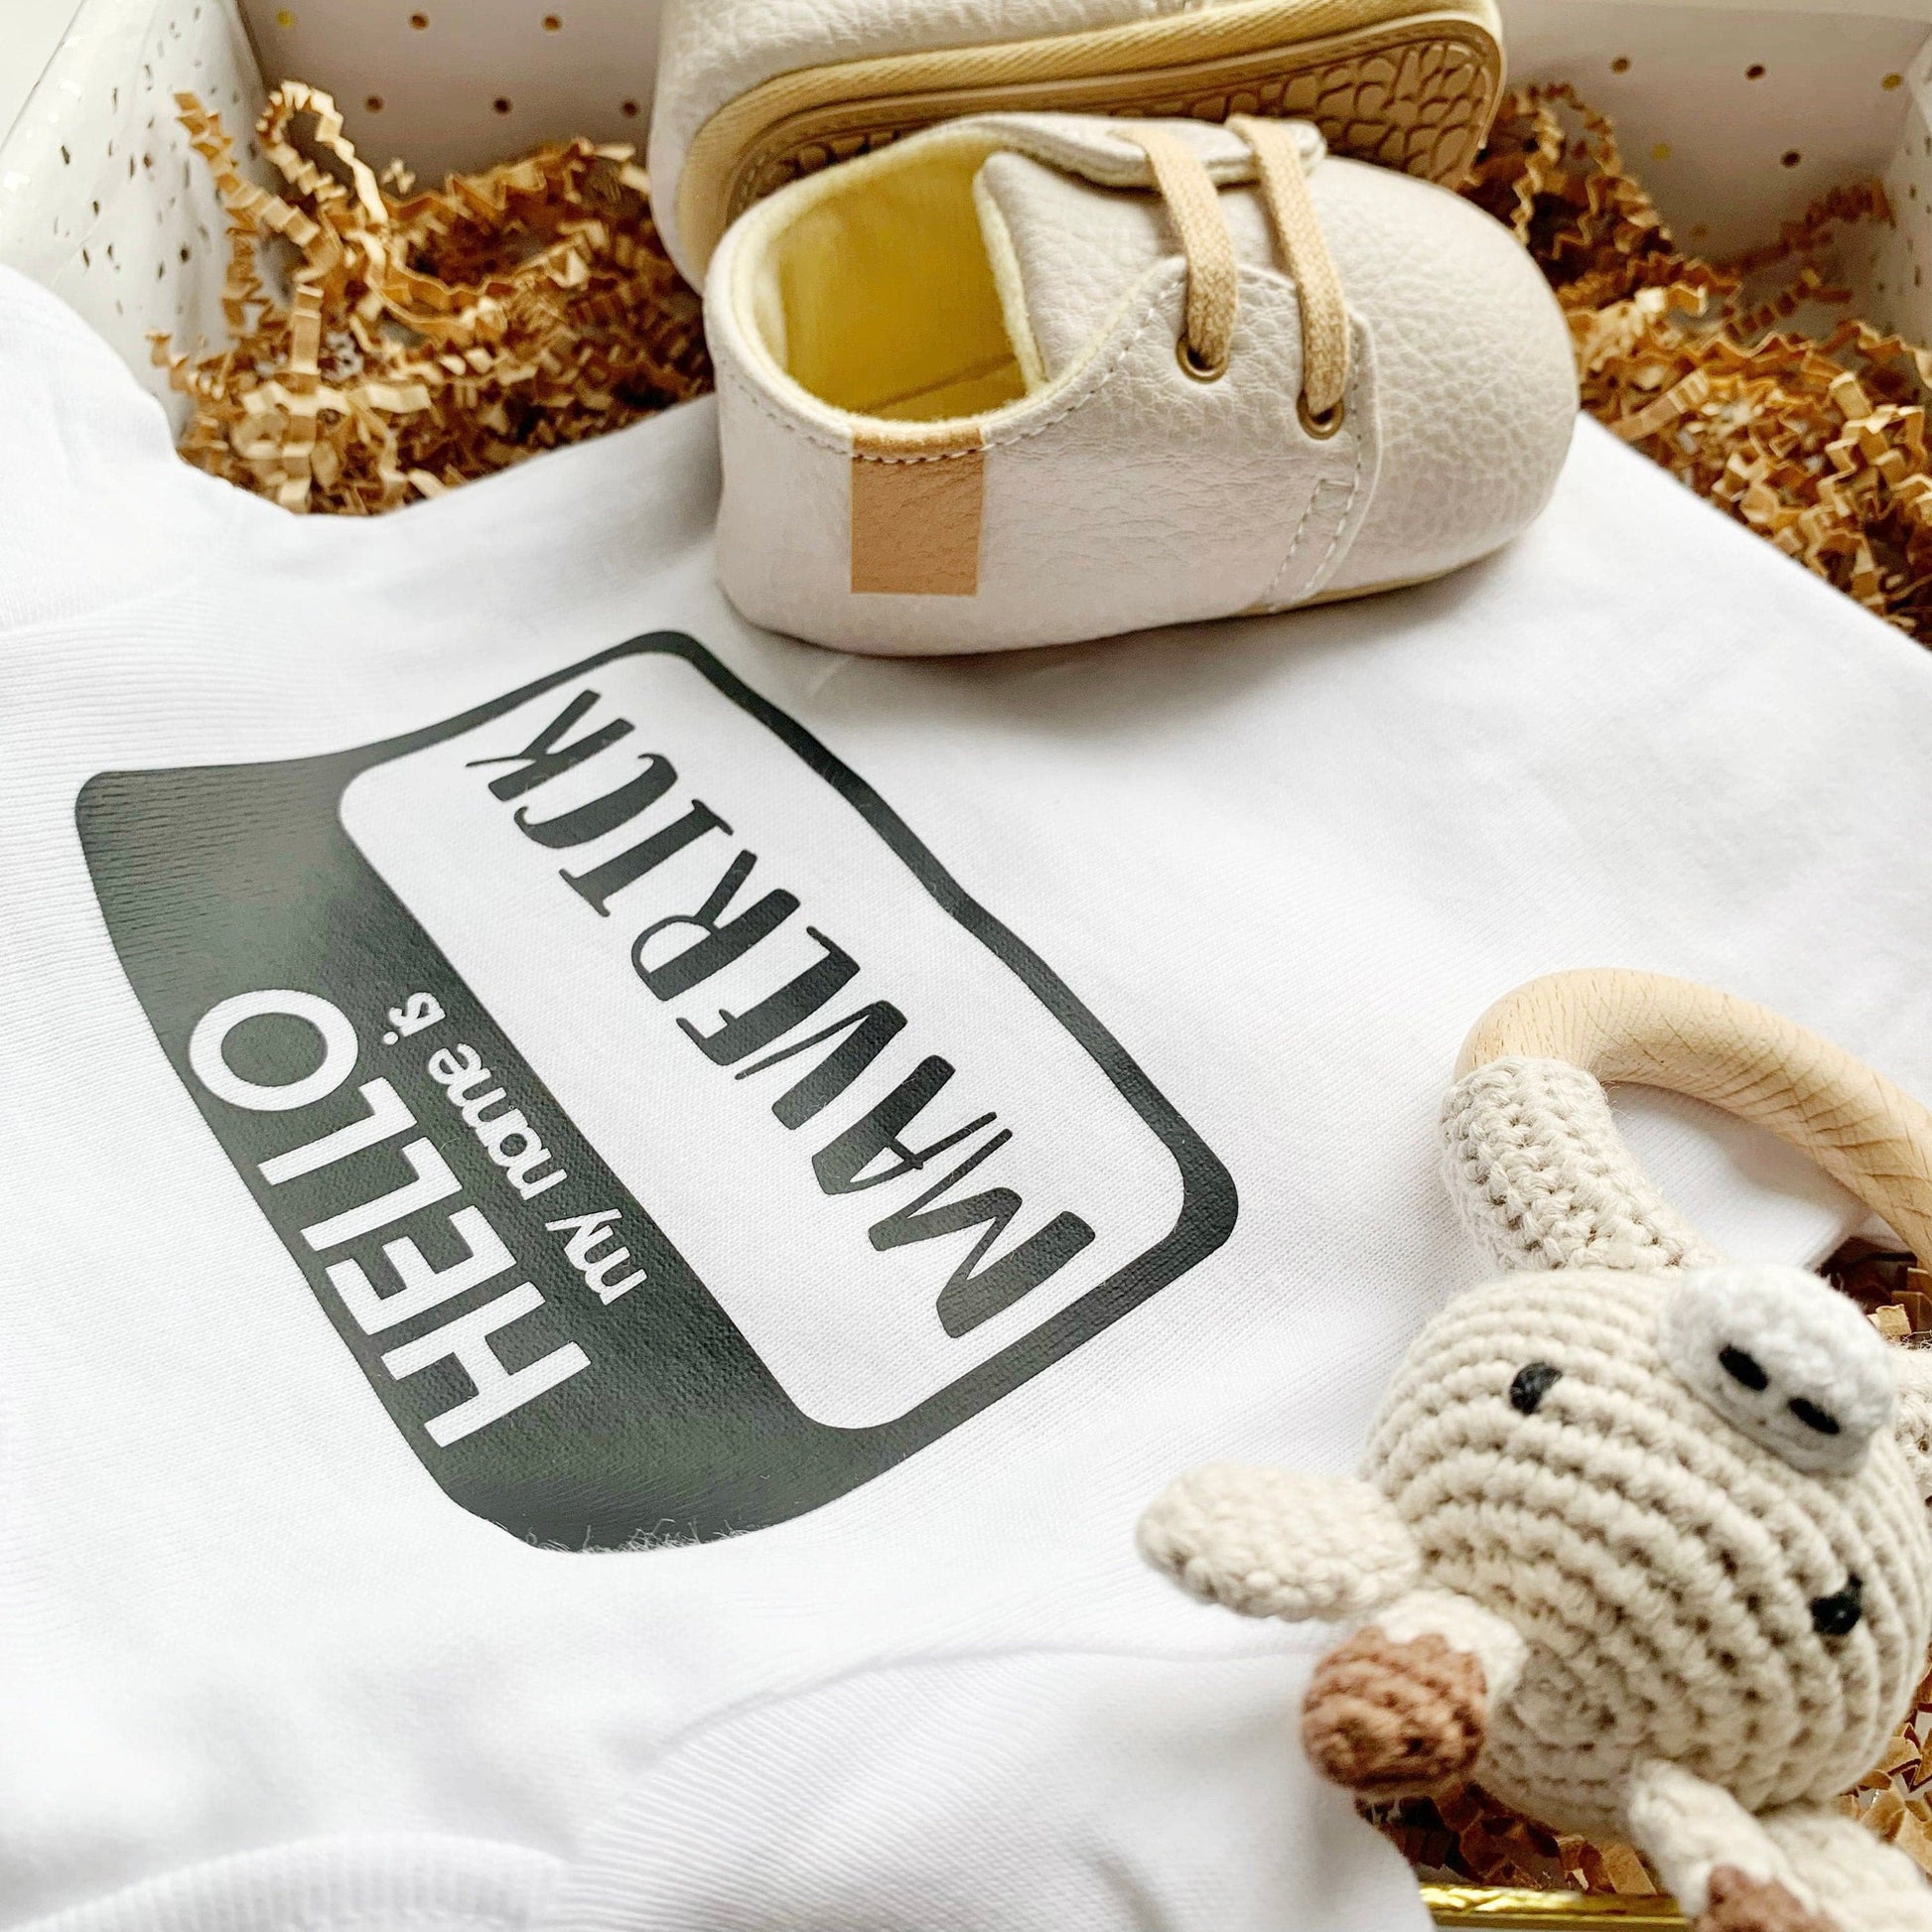 Coming Home Baby Outfit - Hello, My Name is - Baby Shoes and Rattle.